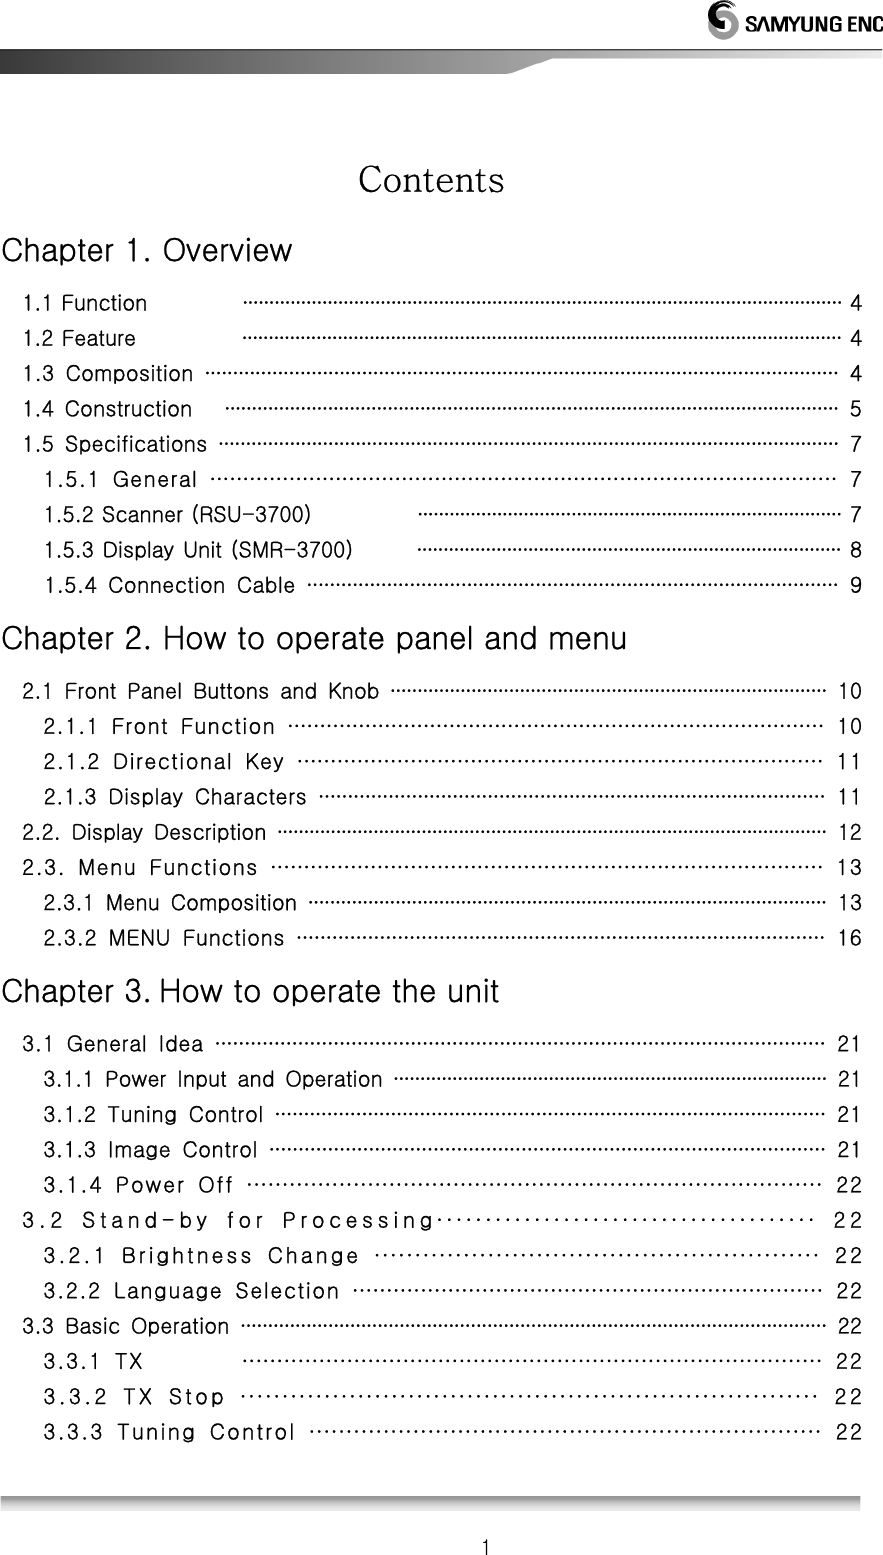   1 Contents Chapter 1. Overview 1.1 Function                  ∙∙∙∙∙∙∙∙∙∙∙∙∙∙∙∙∙∙∙∙∙∙∙∙∙∙∙∙∙∙∙∙∙∙∙∙∙∙∙∙∙∙∙∙∙∙∙∙∙∙∙∙∙∙∙∙∙∙∙∙∙∙∙∙∙∙∙∙∙∙∙∙∙∙∙∙∙∙∙∙∙∙∙∙∙∙∙∙∙∙∙∙∙∙∙∙∙∙∙∙∙∙∙∙∙∙∙∙∙∙∙∙∙ 4 1.2 Feature                    ∙∙∙∙∙∙∙∙∙∙∙∙∙∙∙∙∙∙∙∙∙∙∙∙∙∙∙∙∙∙∙∙∙∙∙∙∙∙∙∙∙∙∙∙∙∙∙∙∙∙∙∙∙∙∙∙∙∙∙∙∙∙∙∙∙∙∙∙∙∙∙∙∙∙∙∙∙∙∙∙∙∙∙∙∙∙∙∙∙∙∙∙∙∙∙∙∙∙∙∙∙∙∙∙∙∙∙∙∙∙∙∙∙ 4 1.3  Composition  ∙∙∙∙∙∙∙∙∙∙∙∙∙∙∙∙∙∙∙∙∙∙∙∙∙∙∙∙∙∙∙∙∙∙∙∙∙∙∙∙∙∙∙∙∙∙∙∙∙∙∙∙∙∙∙∙∙∙∙∙∙∙∙∙∙∙∙∙∙∙∙∙∙∙∙∙∙∙∙∙∙∙∙∙∙∙∙∙∙∙∙∙∙∙∙∙∙∙∙∙∙∙∙∙∙∙∙∙∙∙∙∙∙  4 1.4  Construction      ∙∙∙∙∙∙∙∙∙∙∙∙∙∙∙∙∙∙∙∙∙∙∙∙∙∙∙∙∙∙∙∙∙∙∙∙∙∙∙∙∙∙∙∙∙∙∙∙∙∙∙∙∙∙∙∙∙∙∙∙∙∙∙∙∙∙∙∙∙∙∙∙∙∙∙∙∙∙∙∙∙∙∙∙∙∙∙∙∙∙∙∙∙∙∙∙∙∙∙∙∙∙∙∙∙∙∙∙∙∙∙∙∙  5 1.5  Specifications  ∙∙∙∙∙∙∙∙∙∙∙∙∙∙∙∙∙∙∙∙∙∙∙∙∙∙∙∙∙∙∙∙∙∙∙∙∙∙∙∙∙∙∙∙∙∙∙∙∙∙∙∙∙∙∙∙∙∙∙∙∙∙∙∙∙∙∙∙∙∙∙∙∙∙∙∙∙∙∙∙∙∙∙∙∙∙∙∙∙∙∙∙∙∙∙∙∙∙∙∙∙∙∙∙∙∙∙∙∙∙∙∙∙  7 1.5.1  General  ∙∙∙∙∙∙∙∙∙∙∙∙∙∙∙∙∙∙∙∙∙∙∙∙∙∙∙∙∙∙∙∙∙∙∙∙∙∙∙∙∙∙∙∙∙∙∙∙∙∙∙∙∙∙∙∙∙∙∙∙∙∙∙∙∙∙∙∙∙∙∙∙∙∙∙∙∙∙∙∙∙∙∙∙∙∙∙∙∙∙∙∙∙∙∙  7 1.5.2 Scanner (RSU-3700)                    ∙∙∙∙∙∙∙∙∙∙∙∙∙∙∙∙∙∙∙∙∙∙∙∙∙∙∙∙∙∙∙∙∙∙∙∙∙∙∙∙∙∙∙∙∙∙∙∙∙∙∙∙∙∙∙∙∙∙∙∙∙∙∙∙∙∙∙∙∙∙∙∙∙∙∙∙∙∙∙∙ 7 1.5.3 Display Unit (SMR-3700)            ∙∙∙∙∙∙∙∙∙∙∙∙∙∙∙∙∙∙∙∙∙∙∙∙∙∙∙∙∙∙∙∙∙∙∙∙∙∙∙∙∙∙∙∙∙∙∙∙∙∙∙∙∙∙∙∙∙∙∙∙∙∙∙∙∙∙∙∙∙∙∙∙∙∙∙∙∙∙∙∙ 8 1.5.4  Connection  Cable  ∙∙∙∙∙∙∙∙∙∙∙∙∙∙∙∙∙∙∙∙∙∙∙∙∙∙∙∙∙∙∙∙∙∙∙∙∙∙∙∙∙∙∙∙∙∙∙∙∙∙∙∙∙∙∙∙∙∙∙∙∙∙∙∙∙∙∙∙∙∙∙∙∙∙∙∙∙∙∙∙∙∙∙∙∙∙∙∙∙∙∙∙∙  9 Chapter 2. How to operate panel and menu 2.1  Front  Panel  Buttons  and  Knob  ∙∙∙∙∙∙∙∙∙∙∙∙∙∙∙∙∙∙∙∙∙∙∙∙∙∙∙∙∙∙∙∙∙∙∙∙∙∙∙∙∙∙∙∙∙∙∙∙∙∙∙∙∙∙∙∙∙∙∙∙∙∙∙∙∙∙∙∙∙∙∙∙∙∙∙∙∙∙∙∙∙  10 2.1.1  Front  Function  ∙∙∙∙∙∙∙∙∙∙∙∙∙∙∙∙∙∙∙∙∙∙∙∙∙∙∙∙∙∙∙∙∙∙∙∙∙∙∙∙∙∙∙∙∙∙∙∙∙∙∙∙∙∙∙∙∙∙∙∙∙∙∙∙∙∙∙∙∙∙∙∙∙∙∙∙∙∙∙∙∙∙∙  10 2.1.2  Directional  Key  ∙∙∙∙∙∙∙∙∙∙∙∙∙∙∙∙∙∙∙∙∙∙∙∙∙∙∙∙∙∙∙∙∙∙∙∙∙∙∙∙∙∙∙∙∙∙∙∙∙∙∙∙∙∙∙∙∙∙∙∙∙∙∙∙∙∙∙∙∙∙∙∙∙∙∙∙∙∙∙  11 2.1.3  Display  Characters  ∙∙∙∙∙∙∙∙∙∙∙∙∙∙∙∙∙∙∙∙∙∙∙∙∙∙∙∙∙∙∙∙∙∙∙∙∙∙∙∙∙∙∙∙∙∙∙∙∙∙∙∙∙∙∙∙∙∙∙∙∙∙∙∙∙∙∙∙∙∙∙∙∙∙∙∙∙∙∙∙∙∙∙∙∙∙∙  11 2.2.  Display  Description  ∙∙∙∙∙∙∙∙∙∙∙∙∙∙∙∙∙∙∙∙∙∙∙∙∙∙∙∙∙∙∙∙∙∙∙∙∙∙∙∙∙∙∙∙∙∙∙∙∙∙∙∙∙∙∙∙∙∙∙∙∙∙∙∙∙∙∙∙∙∙∙∙∙∙∙∙∙∙∙∙∙∙∙∙∙∙∙∙∙∙∙∙∙∙∙∙∙∙∙∙∙∙∙  12 2.3.  Menu  Functions  ∙∙∙∙∙∙∙∙∙∙∙∙∙∙∙∙∙∙∙∙∙∙∙∙∙∙∙∙∙∙∙∙∙∙∙∙∙∙∙∙∙∙∙∙∙∙∙∙∙∙∙∙∙∙∙∙∙∙∙∙∙∙∙∙∙∙∙∙∙∙∙∙∙∙∙∙∙∙∙∙∙∙∙  13 2.3.1  Menu  Composition  ∙∙∙∙∙∙∙∙∙∙∙∙∙∙∙∙∙∙∙∙∙∙∙∙∙∙∙∙∙∙∙∙∙∙∙∙∙∙∙∙∙∙∙∙∙∙∙∙∙∙∙∙∙∙∙∙∙∙∙∙∙∙∙∙∙∙∙∙∙∙∙∙∙∙∙∙∙∙∙∙∙∙∙∙∙∙∙∙∙∙∙∙∙∙∙  13 2.3.2  MENU  Functions  ∙∙∙∙∙∙∙∙∙∙∙∙∙∙∙∙∙∙∙∙∙∙∙∙∙∙∙∙∙∙∙∙∙∙∙∙∙∙∙∙∙∙∙∙∙∙∙∙∙∙∙∙∙∙∙∙∙∙∙∙∙∙∙∙∙∙∙∙∙∙∙∙∙∙∙∙∙∙∙∙∙∙∙∙∙∙∙∙∙  16 Chapter 3. How to operate the unit 3.1  General  Idea  ∙∙∙∙∙∙∙∙∙∙∙∙∙∙∙∙∙∙∙∙∙∙∙∙∙∙∙∙∙∙∙∙∙∙∙∙∙∙∙∙∙∙∙∙∙∙∙∙∙∙∙∙∙∙∙∙∙∙∙∙∙∙∙∙∙∙∙∙∙∙∙∙∙∙∙∙∙∙∙∙∙∙∙∙∙∙∙∙∙∙∙∙∙∙∙∙∙∙∙∙∙∙∙  21 3.1.1  Power  Input  and  Operation  ∙∙∙∙∙∙∙∙∙∙∙∙∙∙∙∙∙∙∙∙∙∙∙∙∙∙∙∙∙∙∙∙∙∙∙∙∙∙∙∙∙∙∙∙∙∙∙∙∙∙∙∙∙∙∙∙∙∙∙∙∙∙∙∙∙∙∙∙∙∙∙∙∙∙∙∙∙∙∙∙∙  21 3.1.2  Tuning  Control  ∙∙∙∙∙∙∙∙∙∙∙∙∙∙∙∙∙∙∙∙∙∙∙∙∙∙∙∙∙∙∙∙∙∙∙∙∙∙∙∙∙∙∙∙∙∙∙∙∙∙∙∙∙∙∙∙∙∙∙∙∙∙∙∙∙∙∙∙∙∙∙∙∙∙∙∙∙∙∙∙∙∙∙∙∙∙∙∙∙∙∙∙∙∙∙  21 3.1.3  Image  Control  ∙∙∙∙∙∙∙∙∙∙∙∙∙∙∙∙∙∙∙∙∙∙∙∙∙∙∙∙∙∙∙∙∙∙∙∙∙∙∙∙∙∙∙∙∙∙∙∙∙∙∙∙∙∙∙∙∙∙∙∙∙∙∙∙∙∙∙∙∙∙∙∙∙∙∙∙∙∙∙∙∙∙∙∙∙∙∙∙∙∙∙∙∙∙∙  21 3.1.4  Power  Off  ∙∙∙∙∙∙∙∙∙∙∙∙∙∙∙∙∙∙∙∙∙∙∙∙∙∙∙∙∙∙∙∙∙∙∙∙∙∙∙∙∙∙∙∙∙∙∙∙∙∙∙∙∙∙∙∙∙∙∙∙∙∙∙∙∙∙∙∙∙∙∙∙∙∙∙∙∙∙∙∙∙  22 3.2  Stand-by  for  Processing∙∙∙∙∙∙∙∙∙∙∙∙∙∙∙∙∙∙∙∙∙∙∙∙∙∙∙∙∙∙∙∙∙∙∙∙∙∙∙  22 3.2.1  Brightness  Change  ∙∙∙∙∙∙∙∙∙∙∙∙∙∙∙∙∙∙∙∙∙∙∙∙∙∙∙∙∙∙∙∙∙∙∙∙∙∙∙∙∙∙∙∙∙∙∙∙∙∙∙∙∙∙∙  22 3.2.2  Language  Selection  ∙∙∙∙∙∙∙∙∙∙∙∙∙∙∙∙∙∙∙∙∙∙∙∙∙∙∙∙∙∙∙∙∙∙∙∙∙∙∙∙∙∙∙∙∙∙∙∙∙∙∙∙∙∙∙∙∙∙∙∙∙∙∙∙∙∙∙∙∙  22 3.3  Basic  Operation  ∙∙∙∙∙∙∙∙∙∙∙∙∙∙∙∙∙∙∙∙∙∙∙∙∙∙∙∙∙∙∙∙∙∙∙∙∙∙∙∙∙∙∙∙∙∙∙∙∙∙∙∙∙∙∙∙∙∙∙∙∙∙∙∙∙∙∙∙∙∙∙∙∙∙∙∙∙∙∙∙∙∙∙∙∙∙∙∙∙∙∙∙∙∙∙∙∙∙∙∙∙∙∙∙∙∙∙  22 3.3.1  TX                ∙∙∙∙∙∙∙∙∙∙∙∙∙∙∙∙∙∙∙∙∙∙∙∙∙∙∙∙∙∙∙∙∙∙∙∙∙∙∙∙∙∙∙∙∙∙∙∙∙∙∙∙∙∙∙∙∙∙∙∙∙∙∙∙∙∙∙∙∙∙∙∙∙∙∙∙∙∙∙∙∙∙∙  22 3.3.2  TX  Stop  ∙∙∙∙∙∙∙∙∙∙∙∙∙∙∙∙∙∙∙∙∙∙∙∙∙∙∙∙∙∙∙∙∙∙∙∙∙∙∙∙∙∙∙∙∙∙∙∙∙∙∙∙∙∙∙∙∙∙∙∙∙∙∙∙∙∙∙∙∙  22 3.3.3  Tuning  Control  ∙∙∙∙∙∙∙∙∙∙∙∙∙∙∙∙∙∙∙∙∙∙∙∙∙∙∙∙∙∙∙∙∙∙∙∙∙∙∙∙∙∙∙∙∙∙∙∙∙∙∙∙∙∙∙∙∙∙∙∙∙∙∙∙∙∙∙∙∙  22  